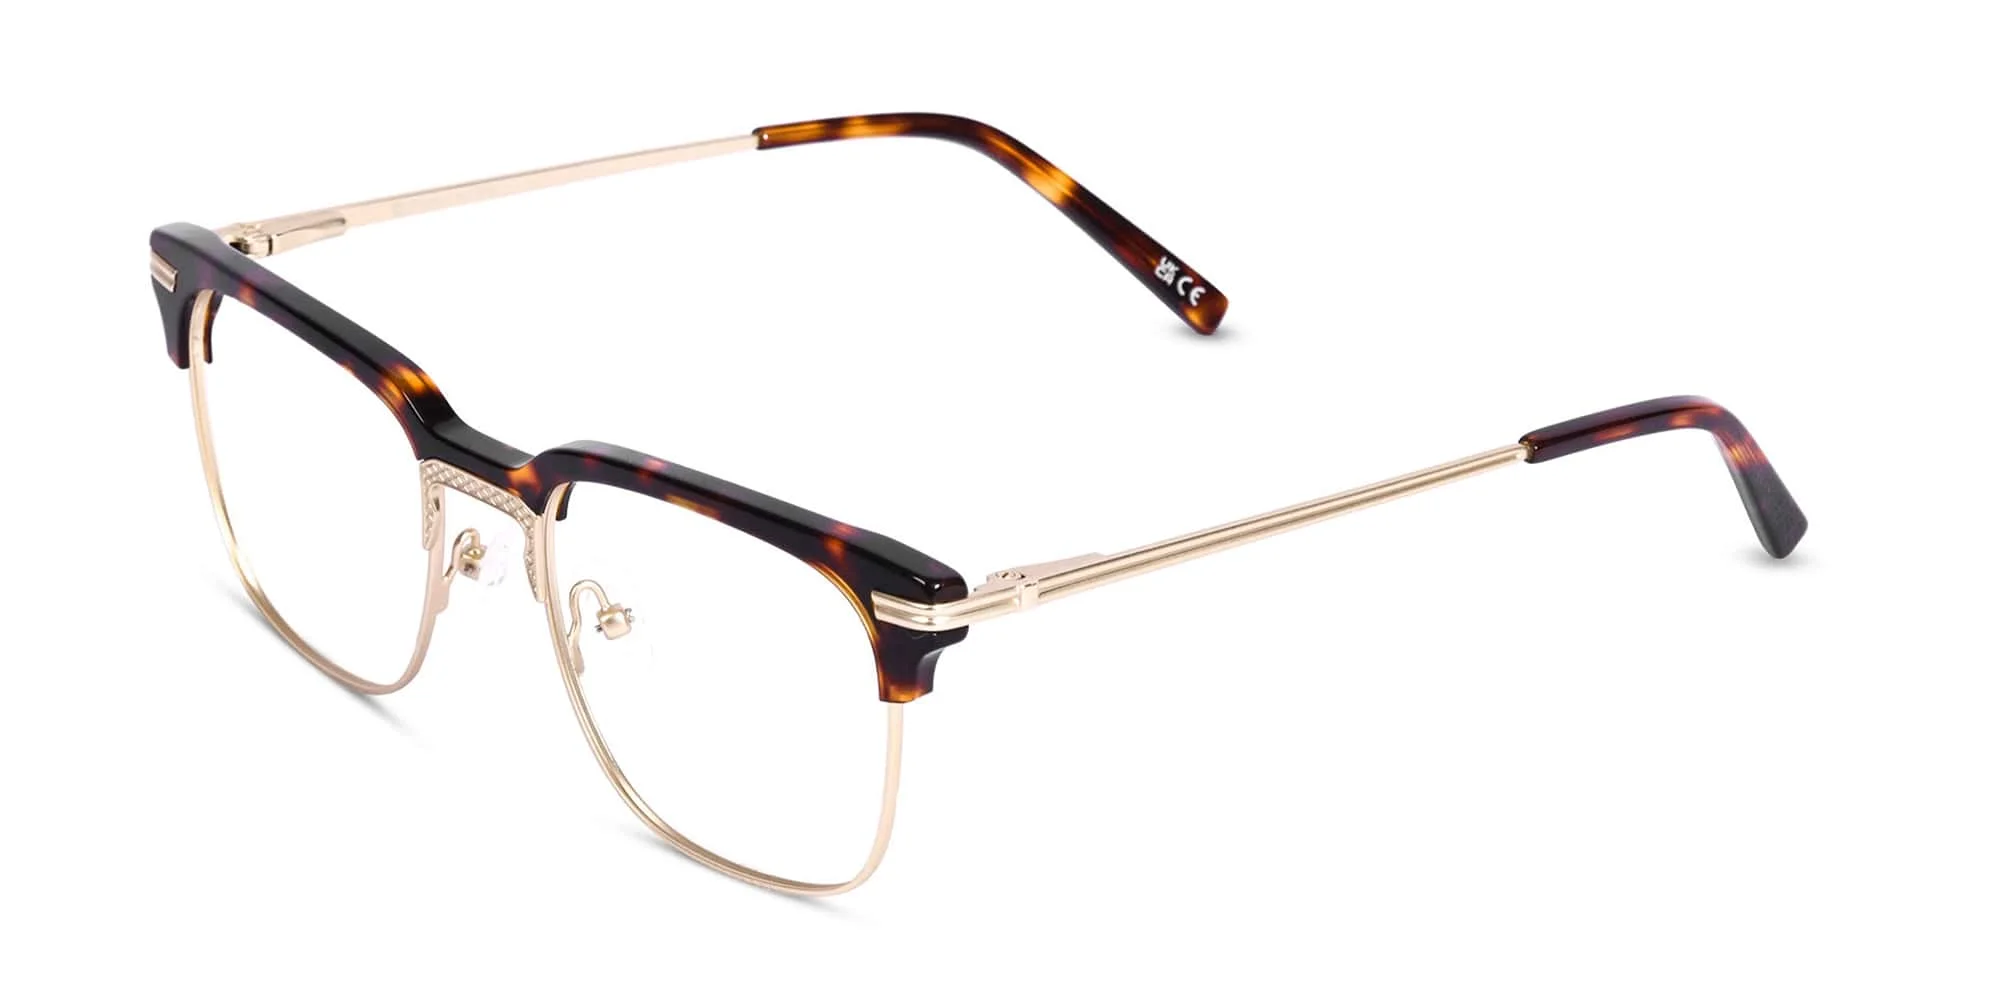 Tortoise Shell And Gold Glasses